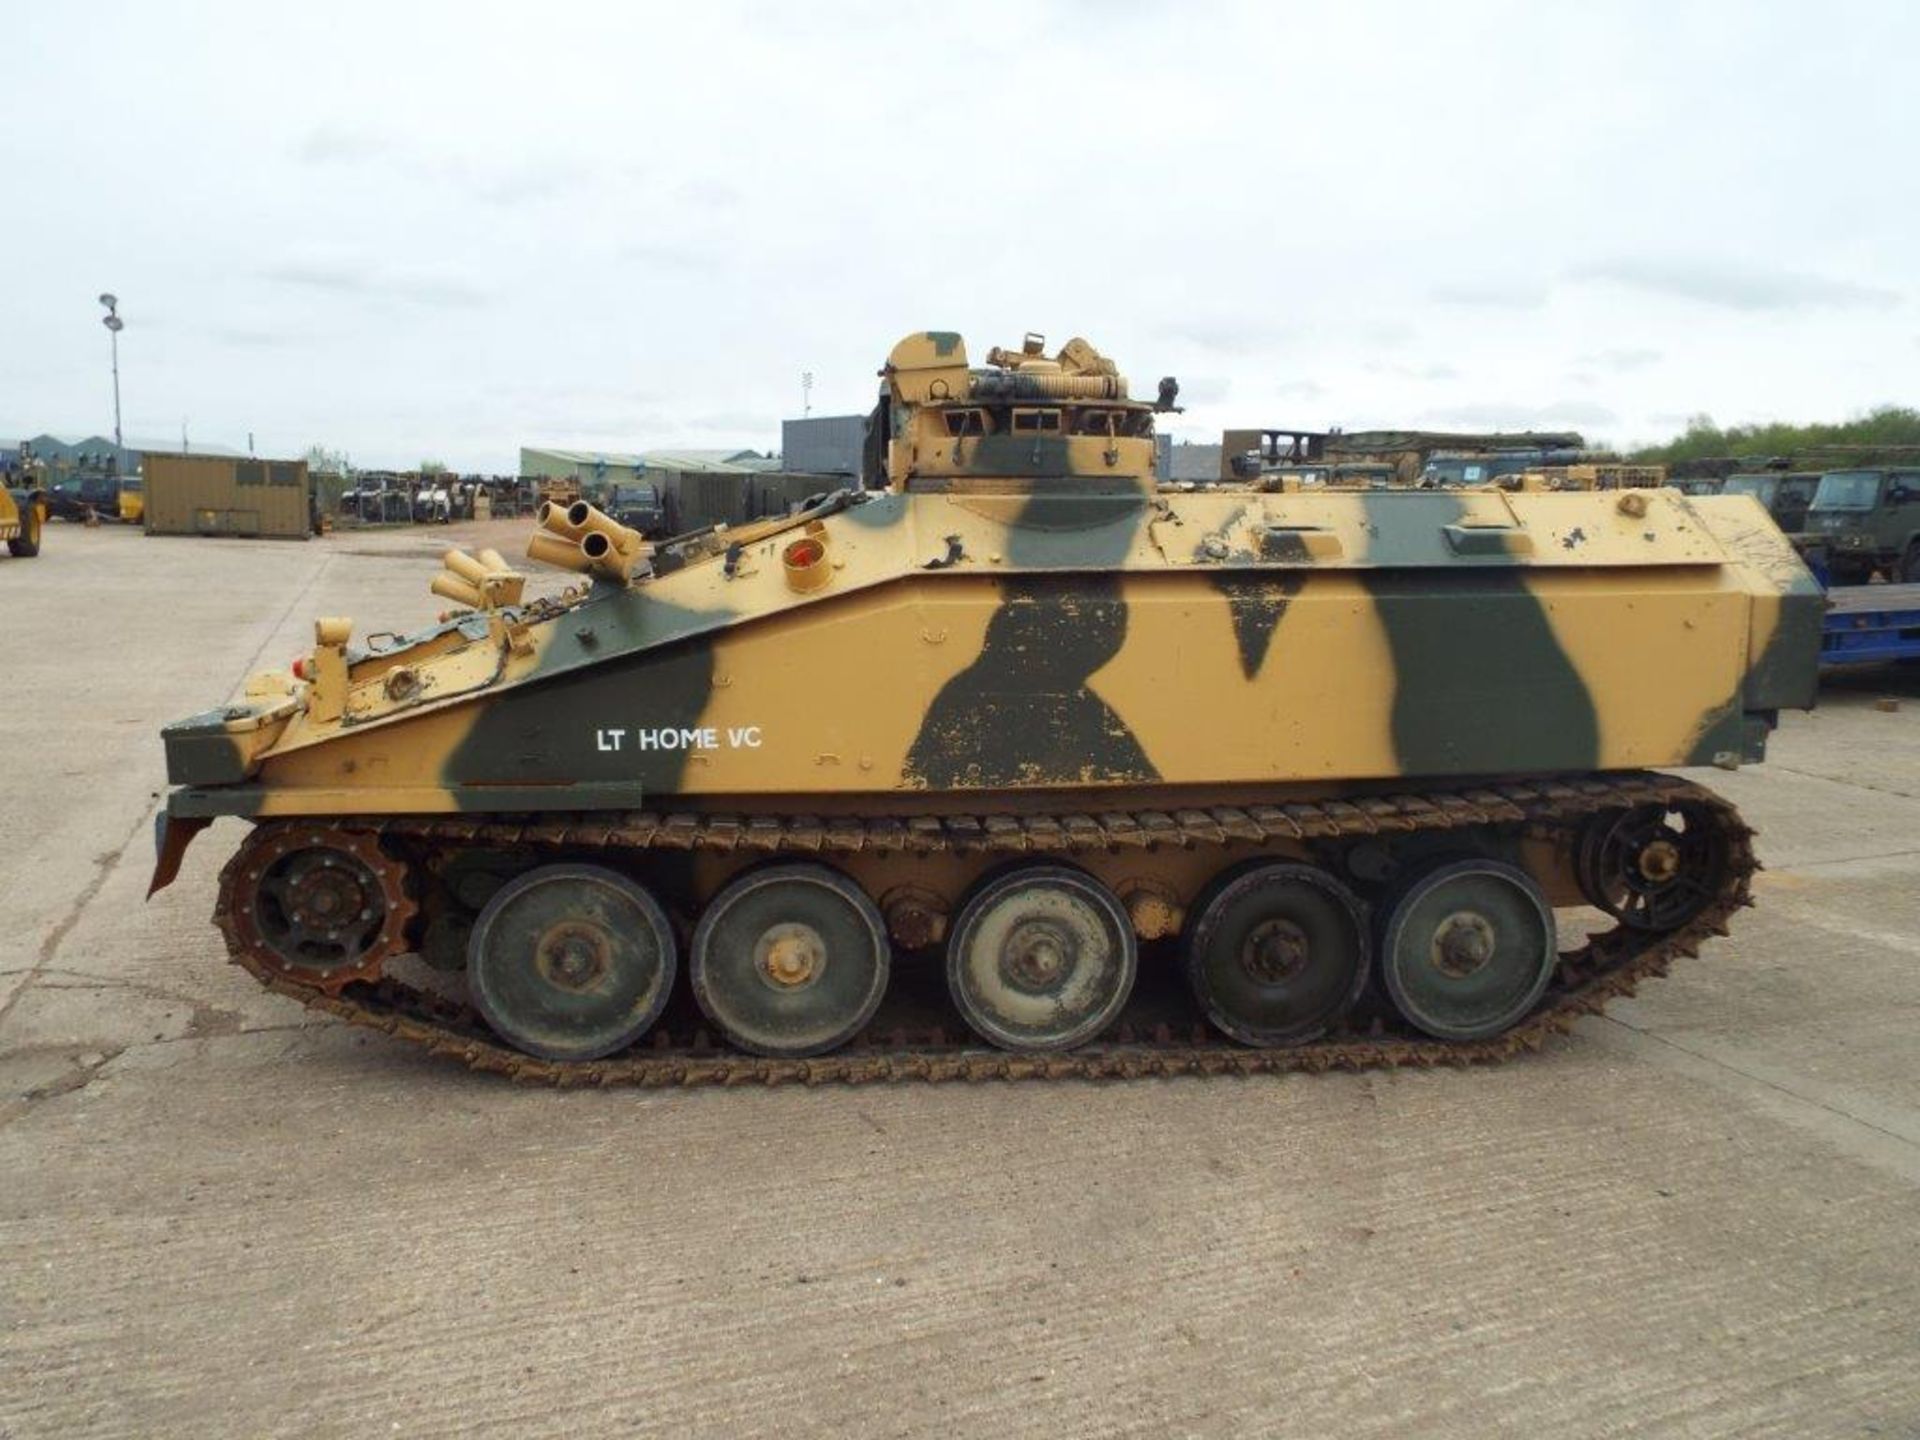 CVRT (Combat Vehicle Reconnaissance Tracked) Spartan Armoured Personnel Carrier - Image 4 of 29